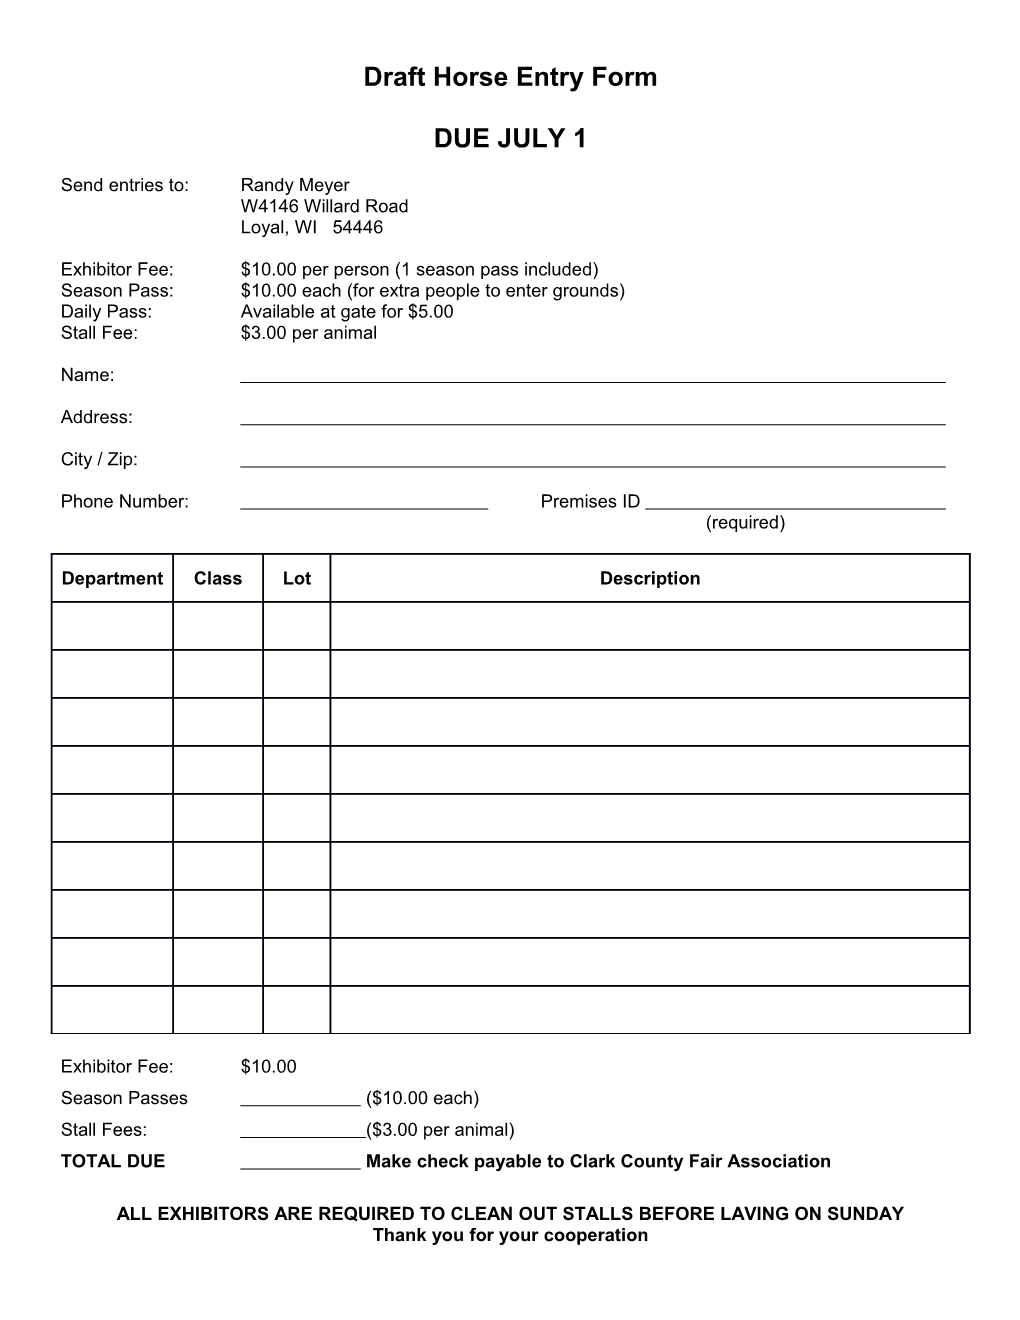 Draft Horse Entry Form